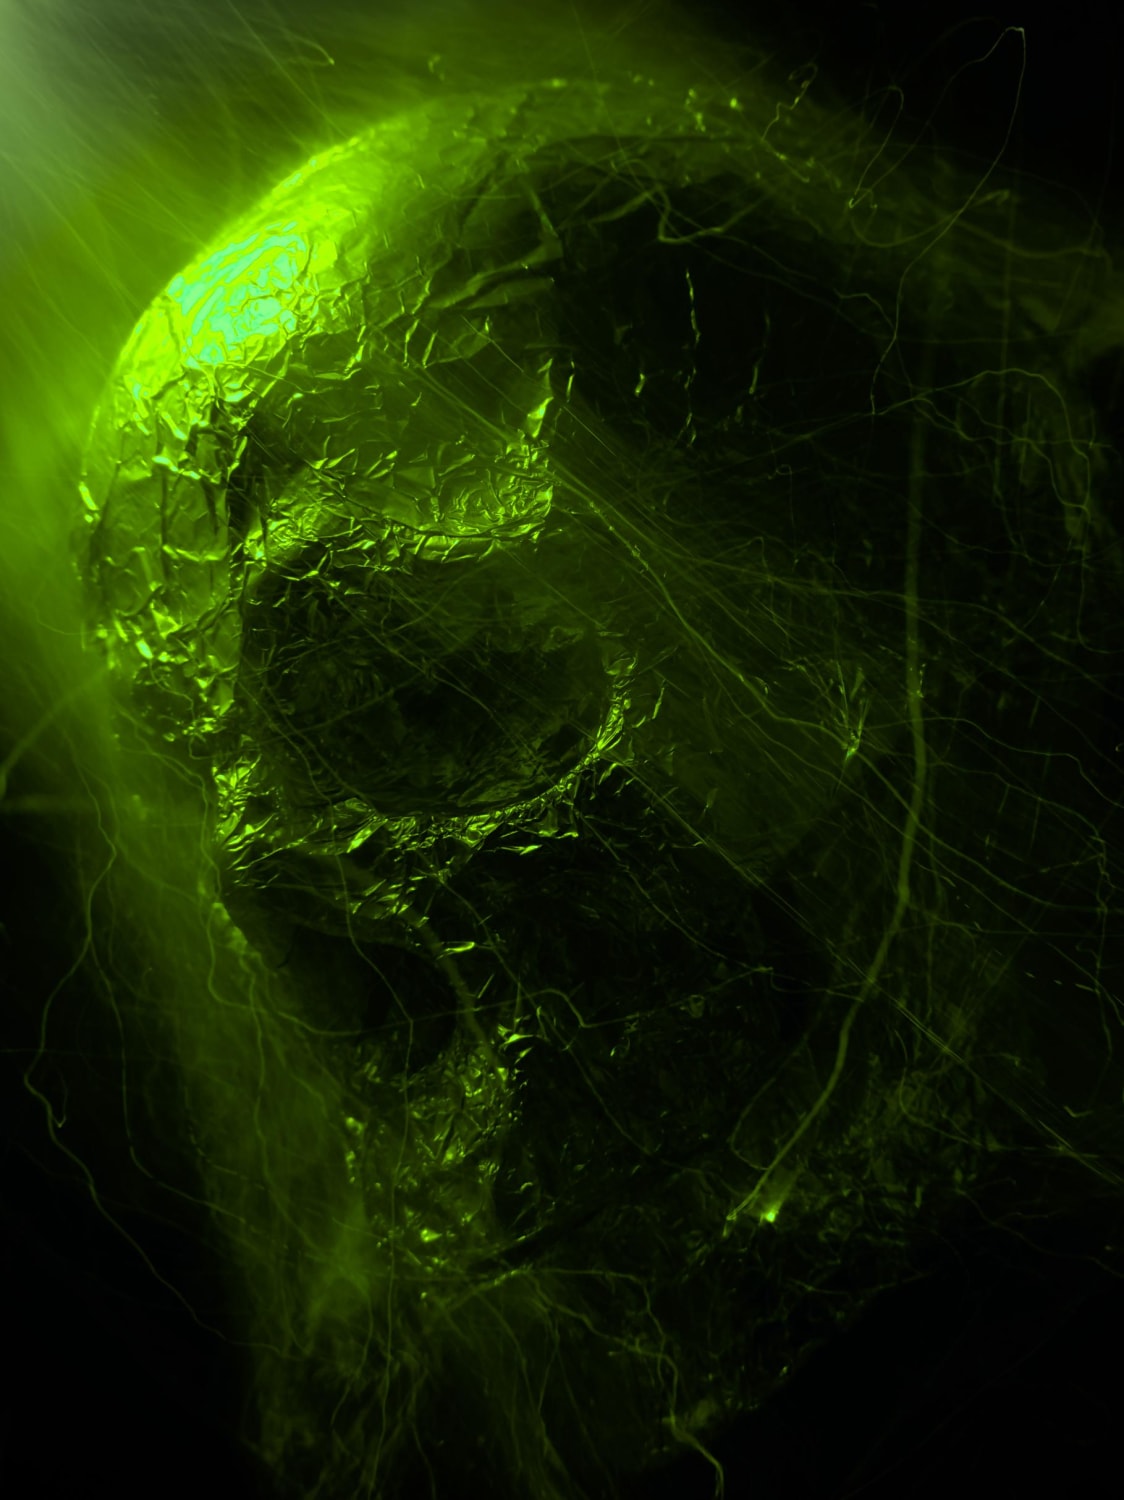 Light painting portrait of plastic human skull with baking foil on it. Exposure time 18s, iso 100. Made in pro mode in Xiaomi mi 9t with system camera app.